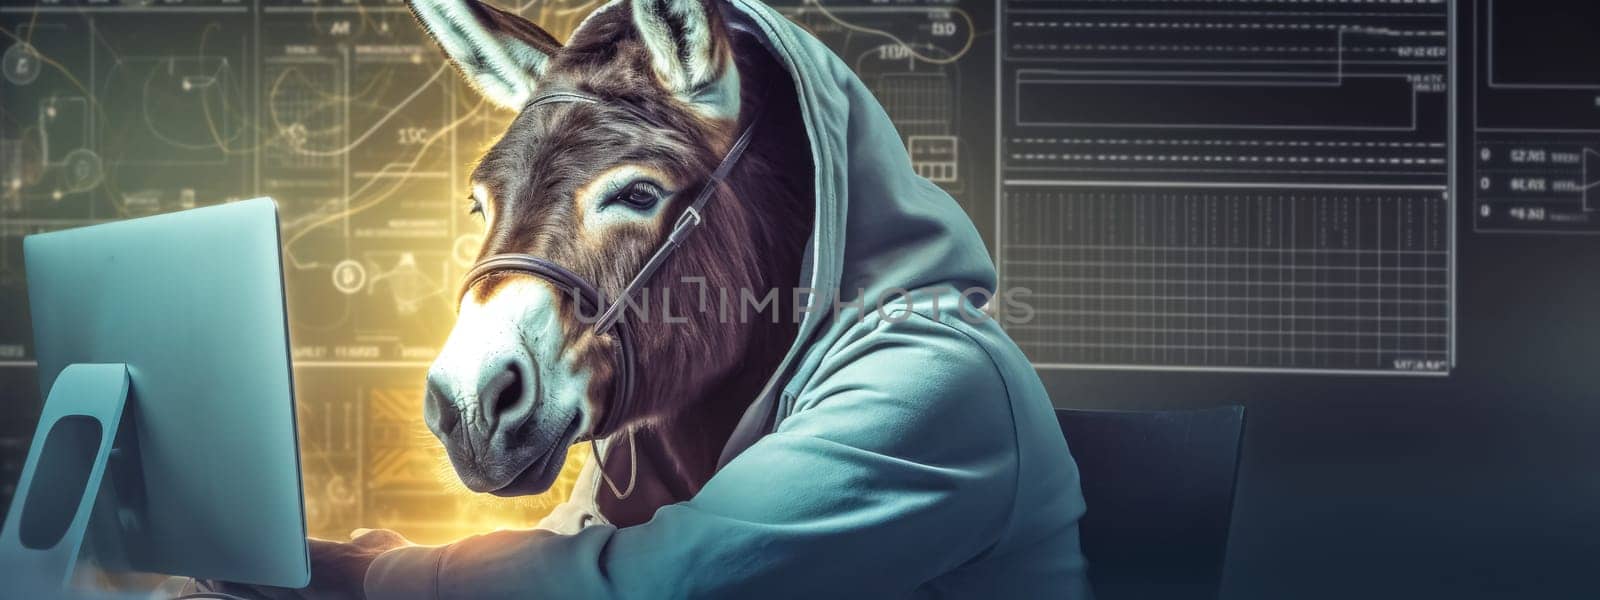 Humorous image of a donkey in a hoodie using a laptop with futuristic digital graphics overlay